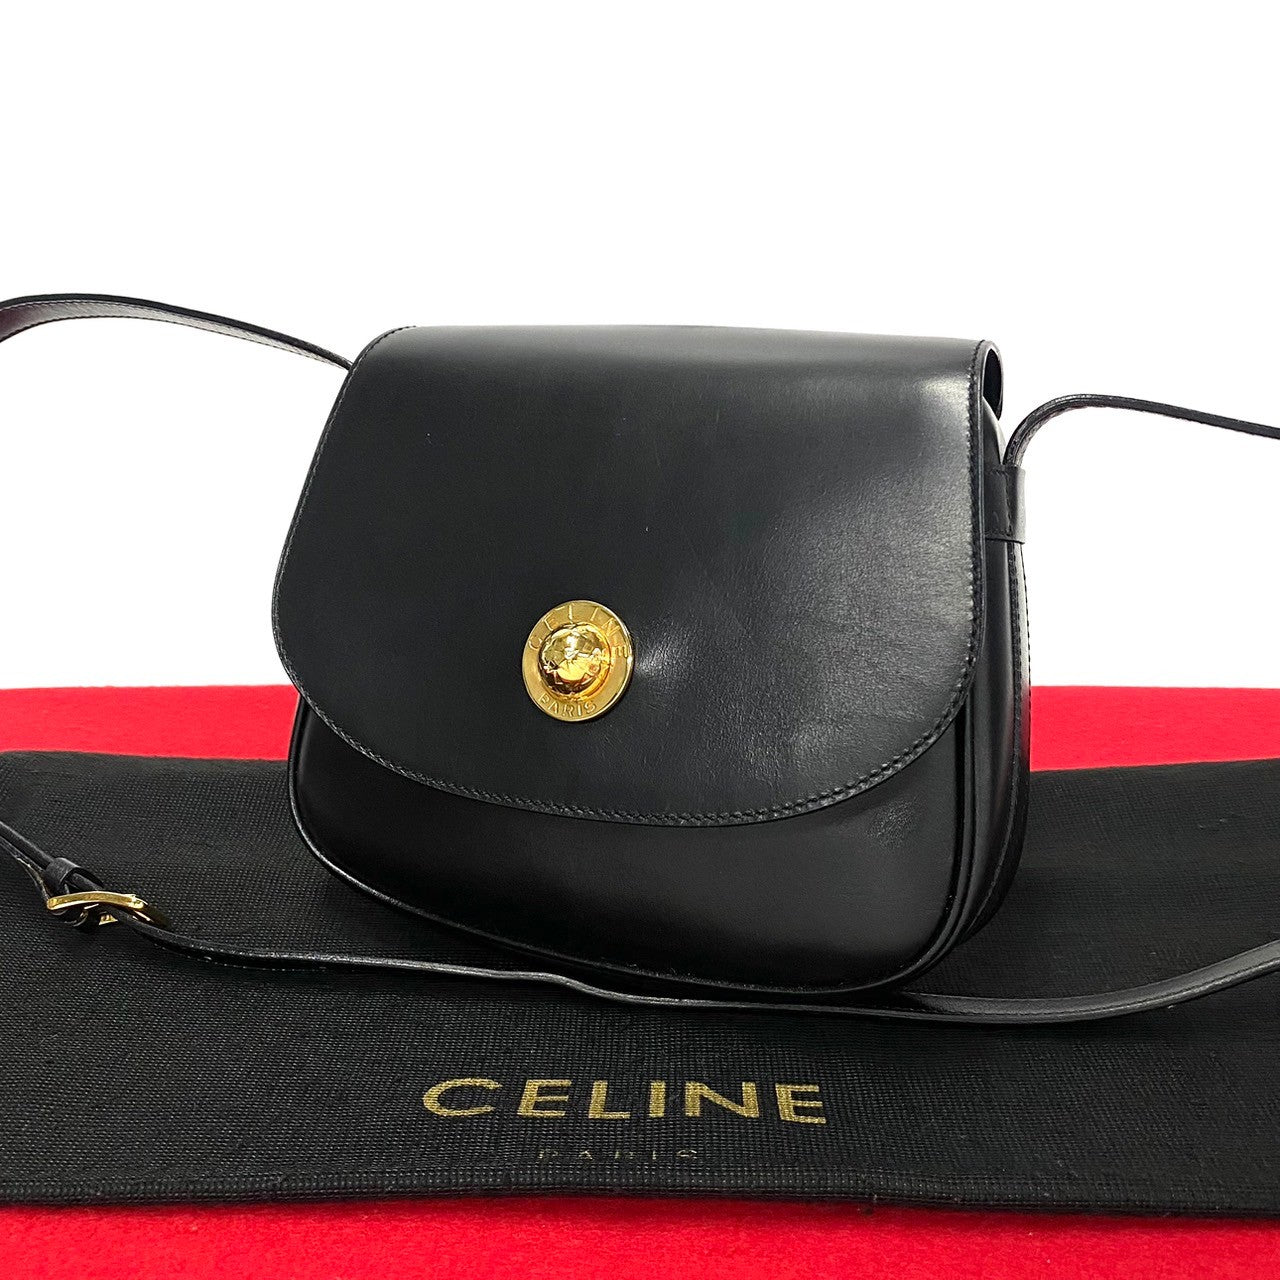 Celine Leather Mini Crossbody Bag  Leather Crossbody Bag in Excellent condition